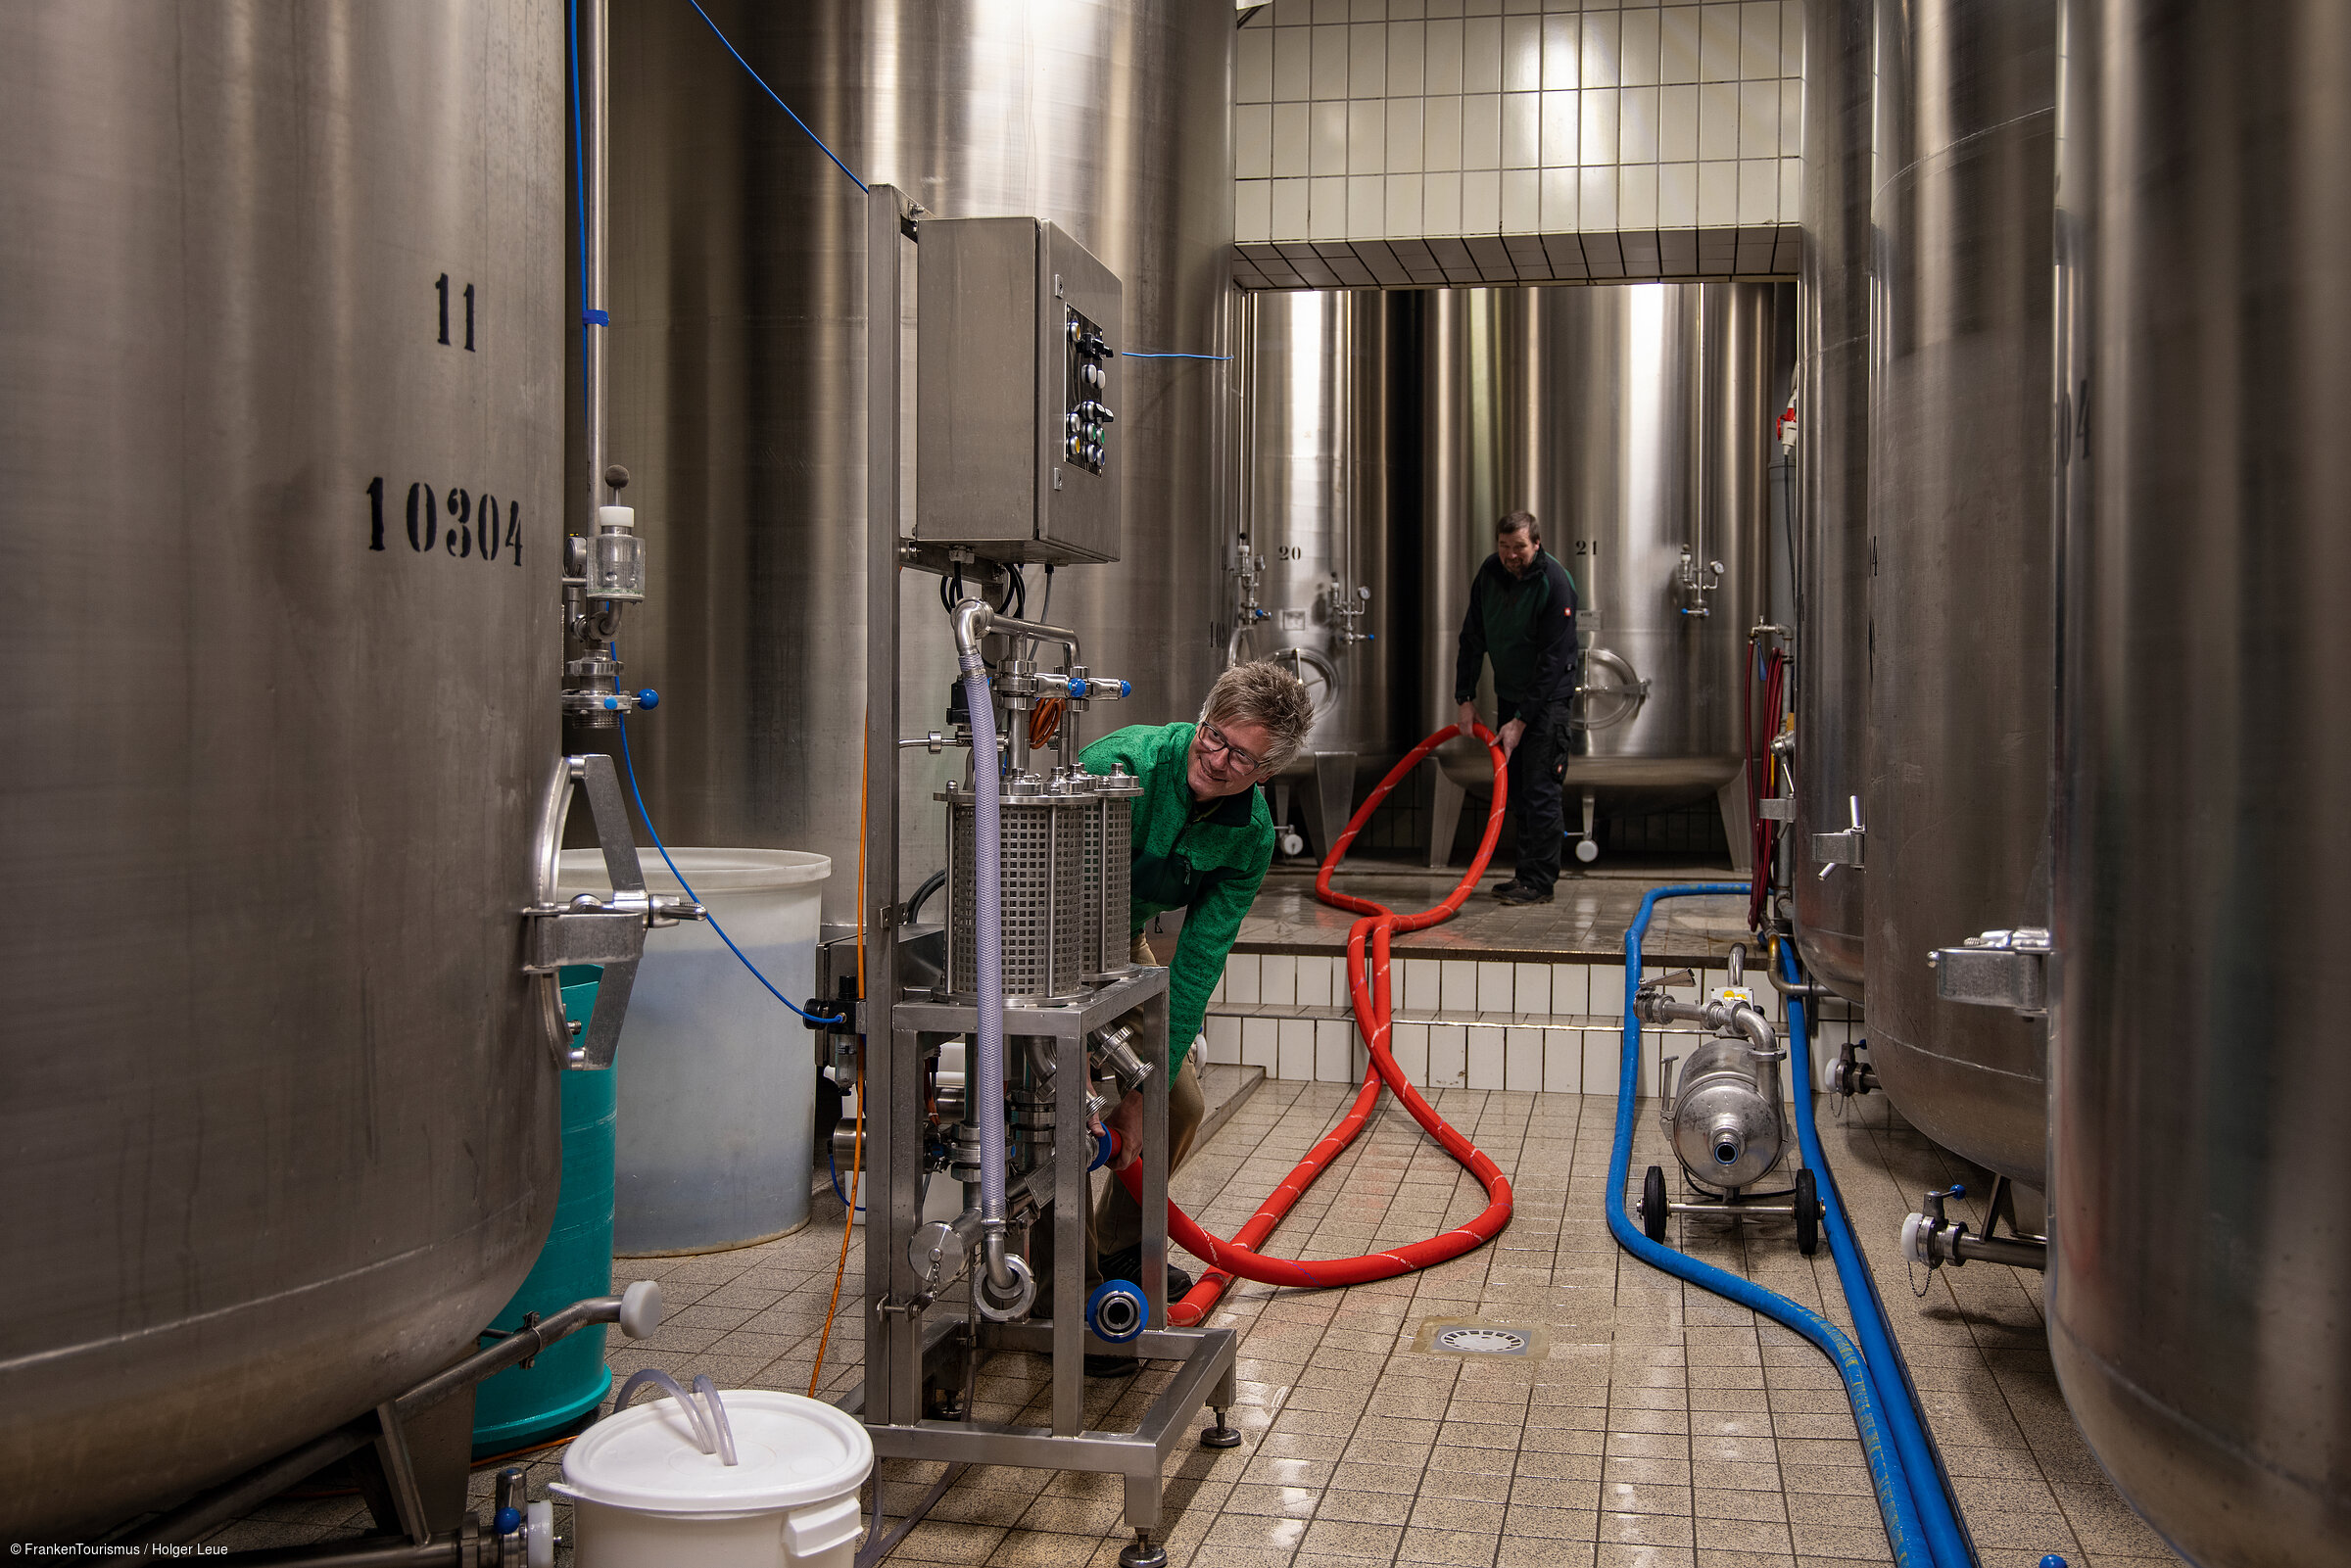 Brewery owner Andreas Nothhaft and brewmaster Frank Seyferth of Brauerei Nothhaft brewery